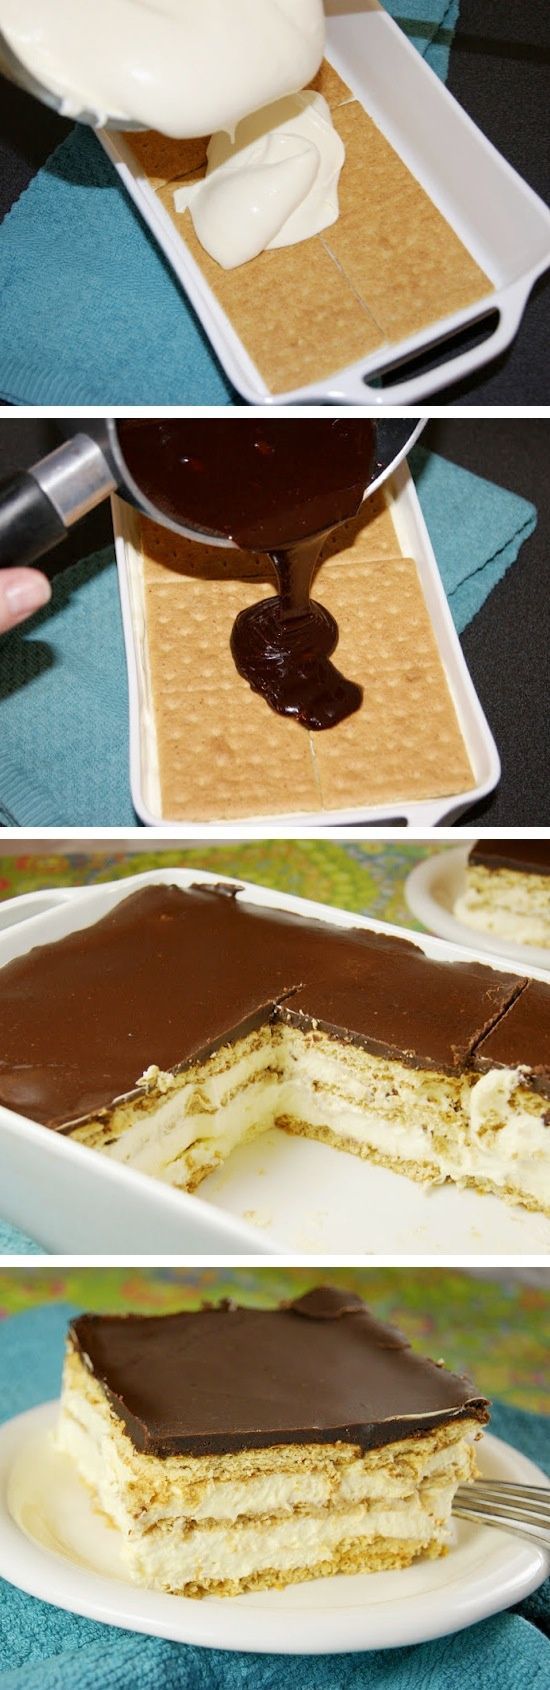 No-Bake Chocolate Eclair Dessert    THis is so good and great for summer